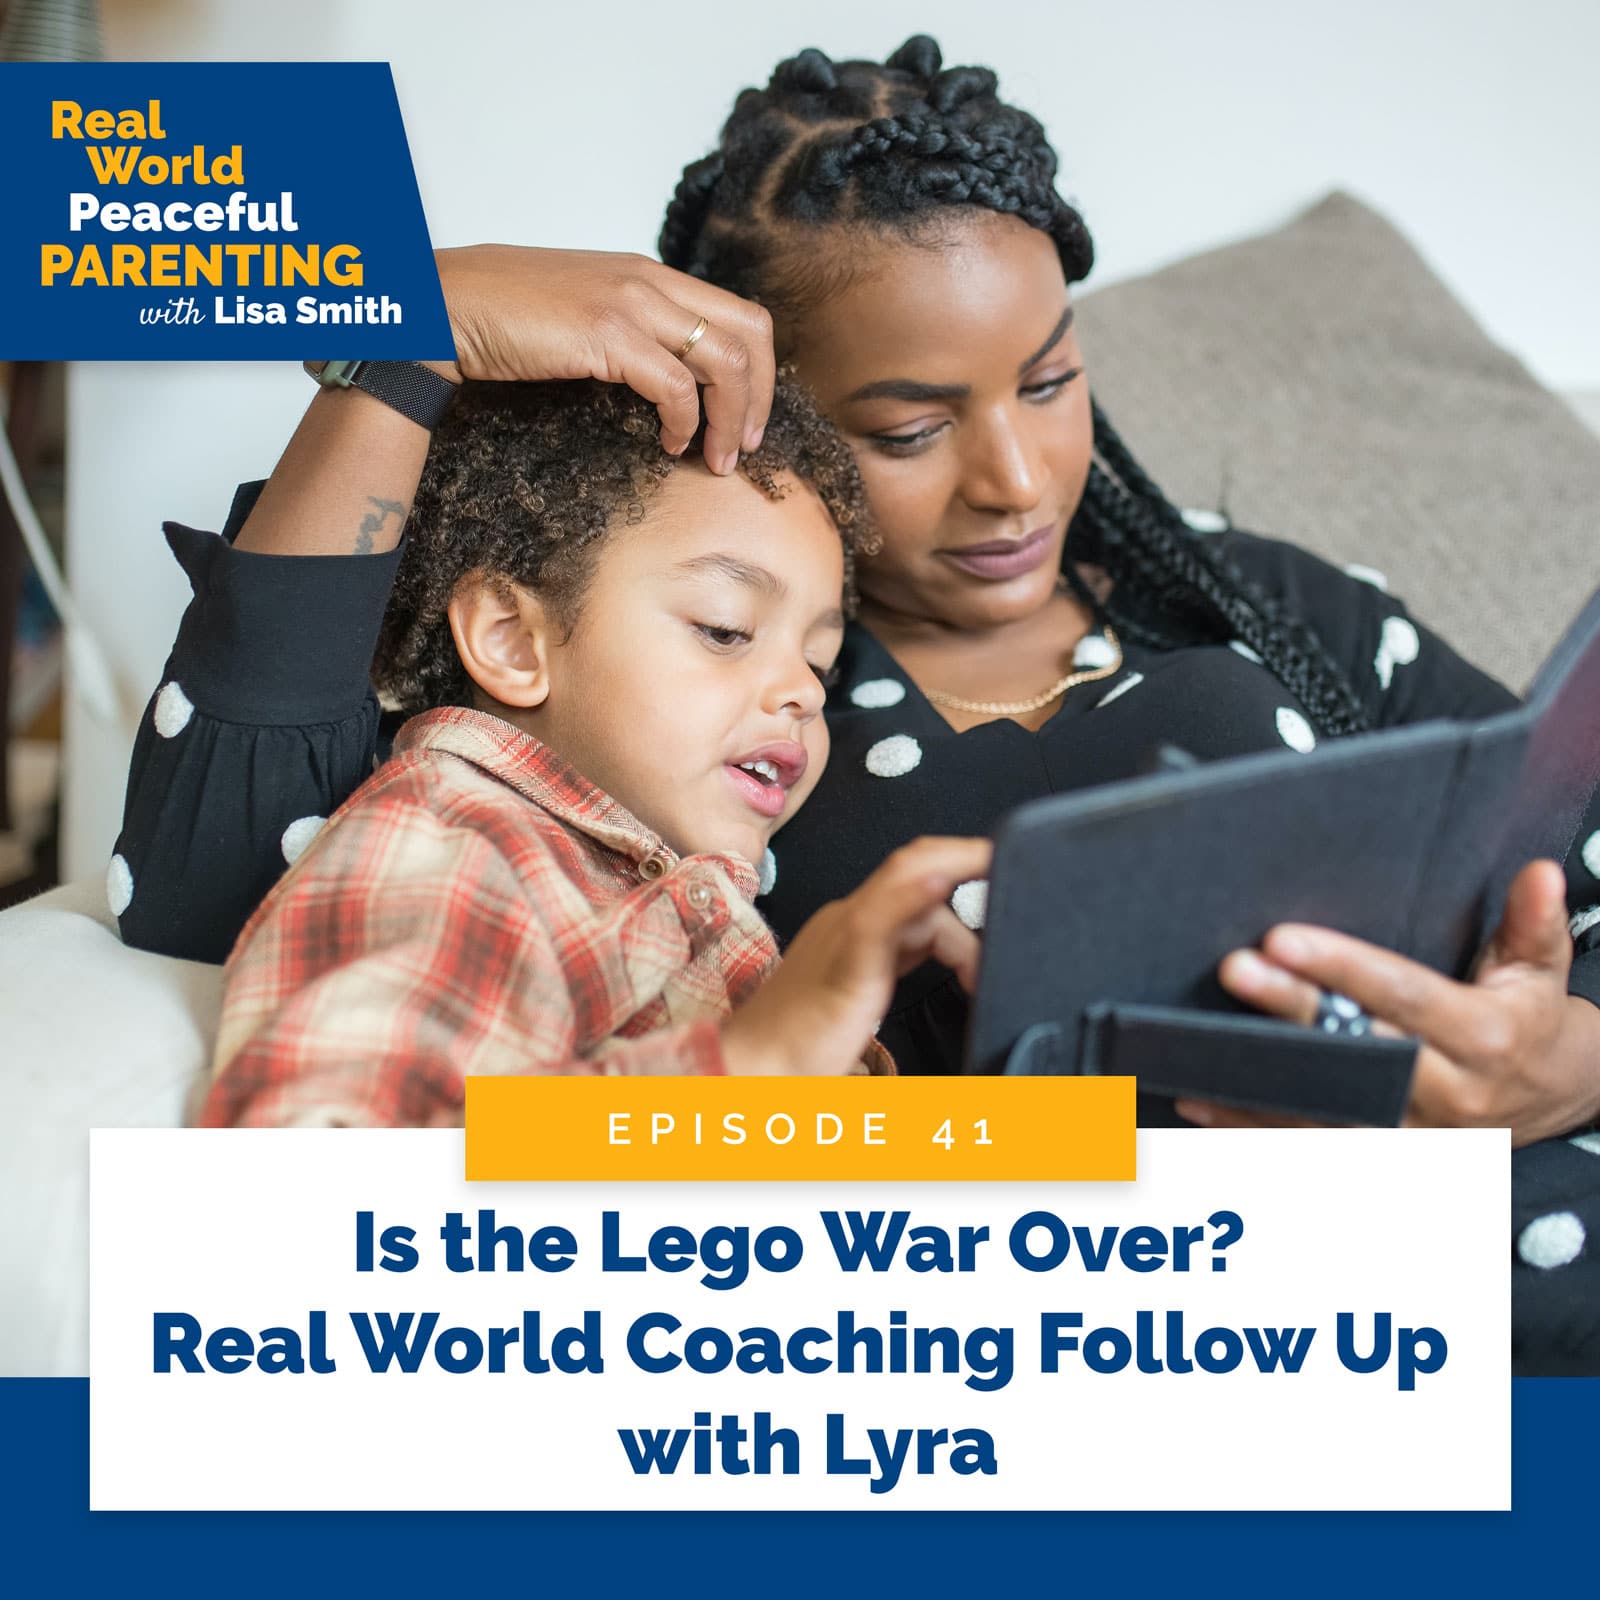 Real World Peaceful Parenting with Lisa Smith | Is the Lego War Over? Real World Coaching Follow Up with Lyra